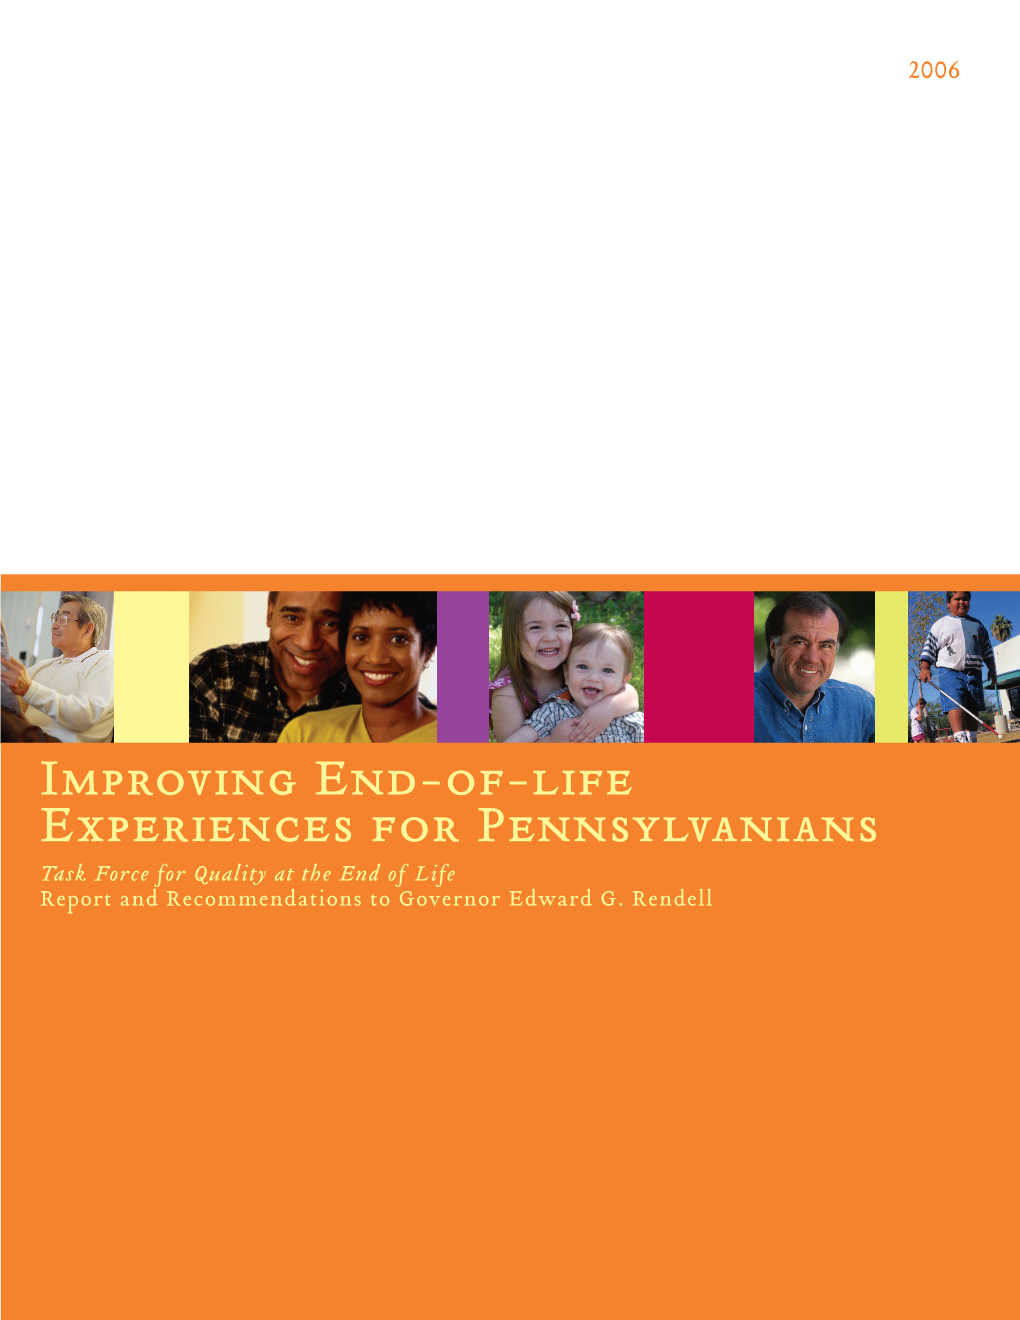 Improving End-Of-Life Experiences for Pennsylvanians